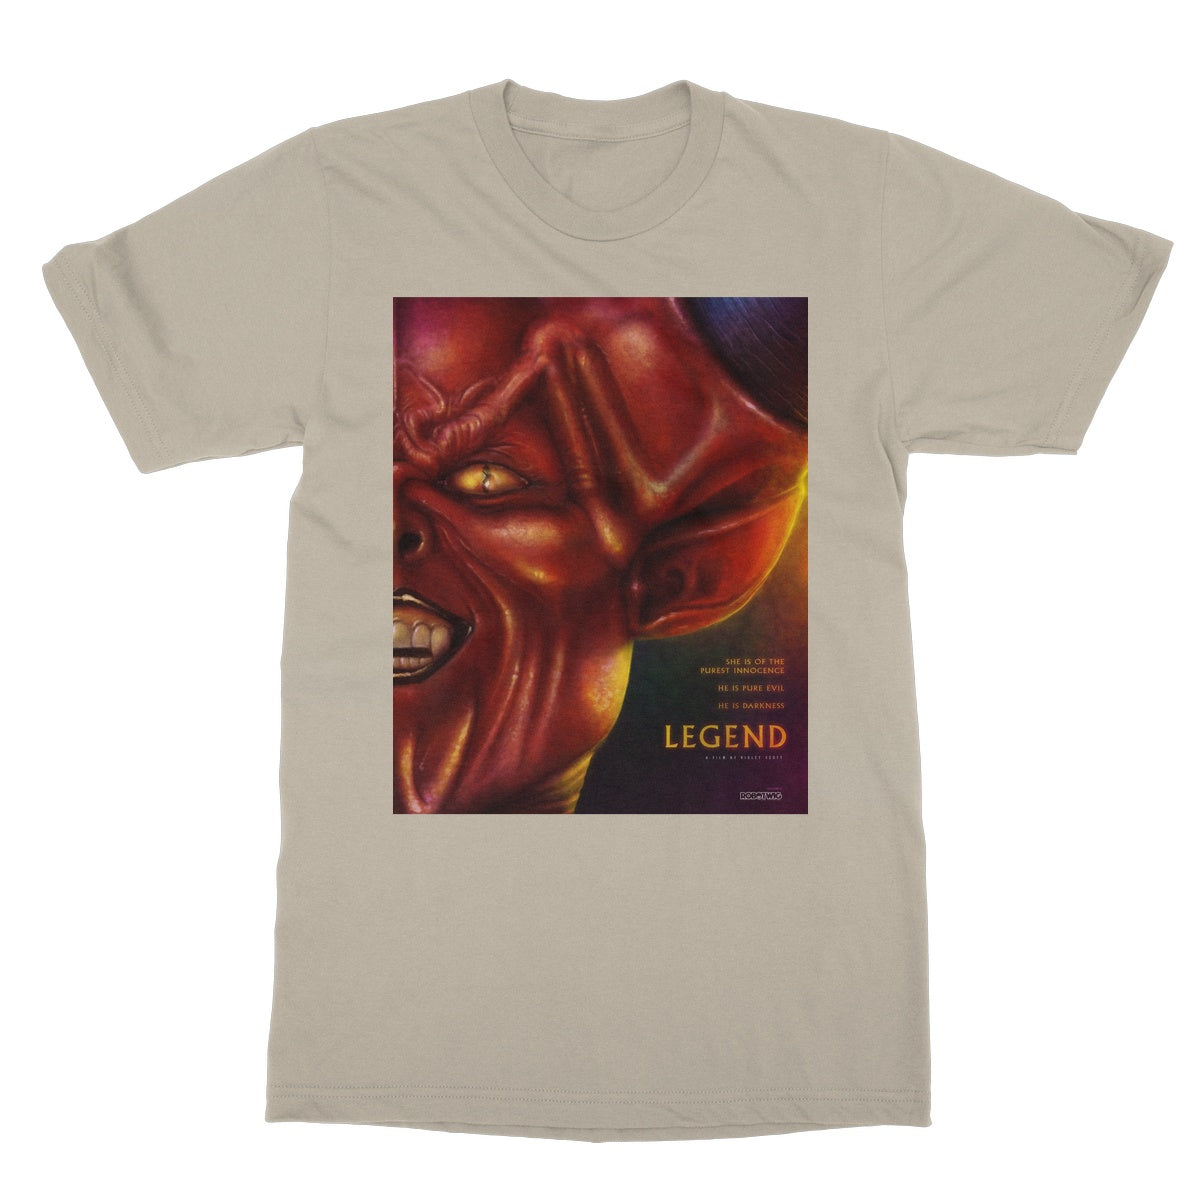 Legend Illustrated Tee Softstyle T-Shirt